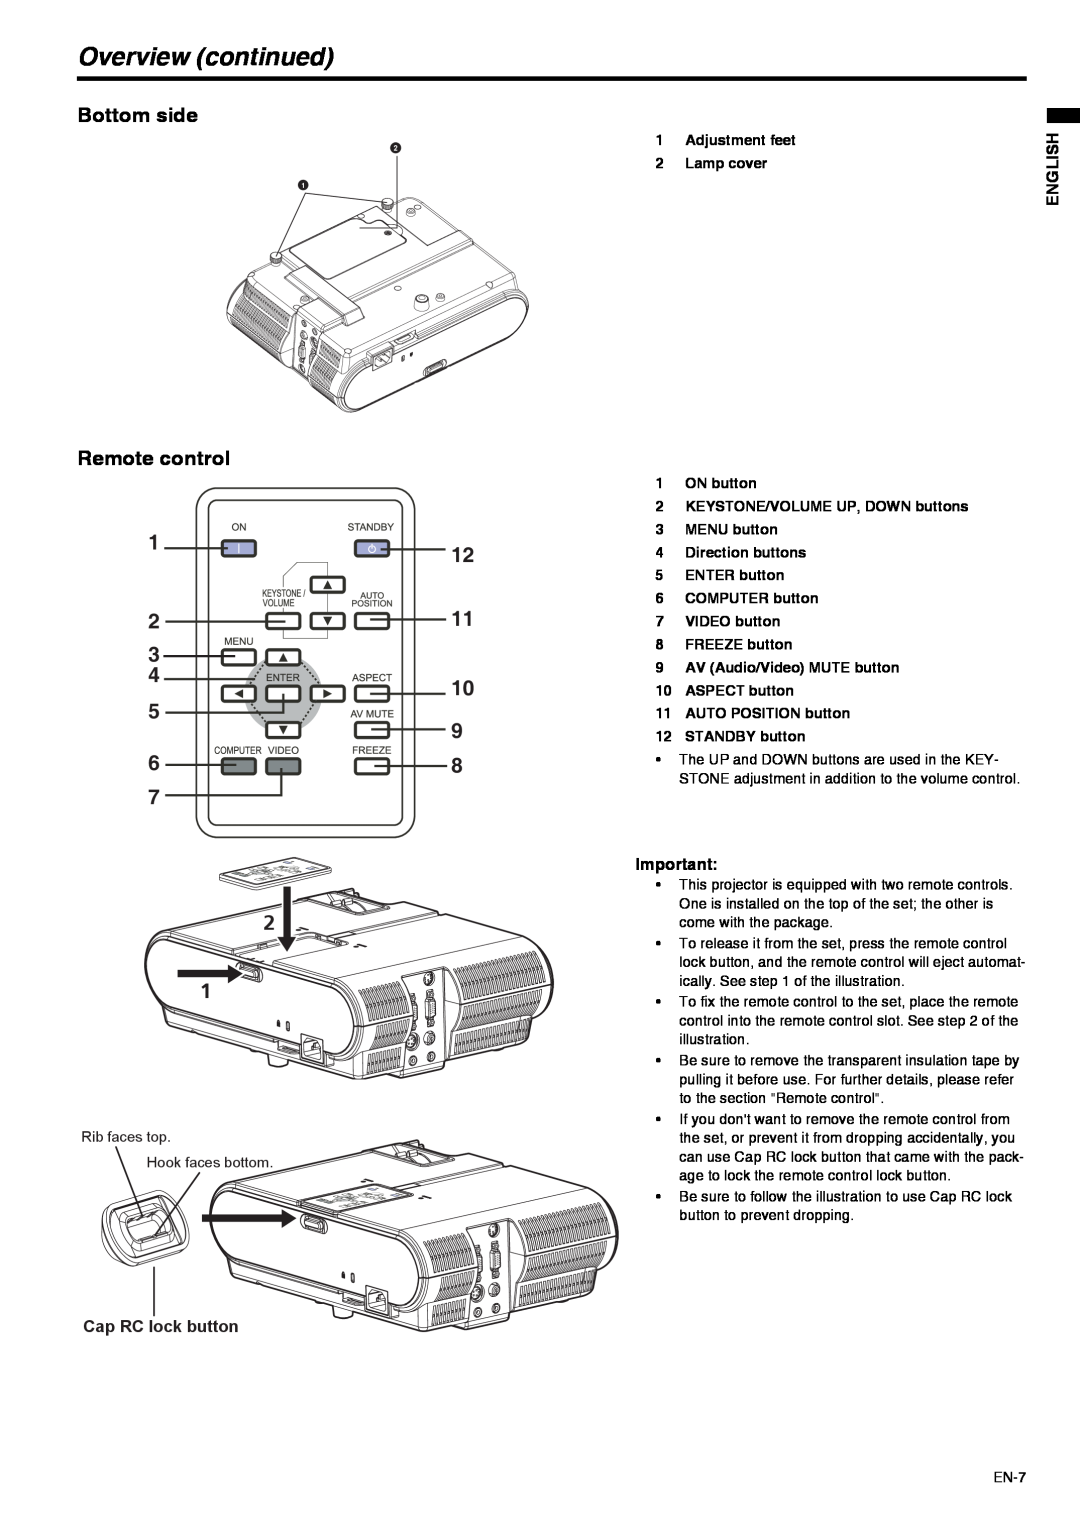 Mitsubishi Electronics XD211U user manual Overview continued, Bottom side, Remote control, English, Cap RC lock button 